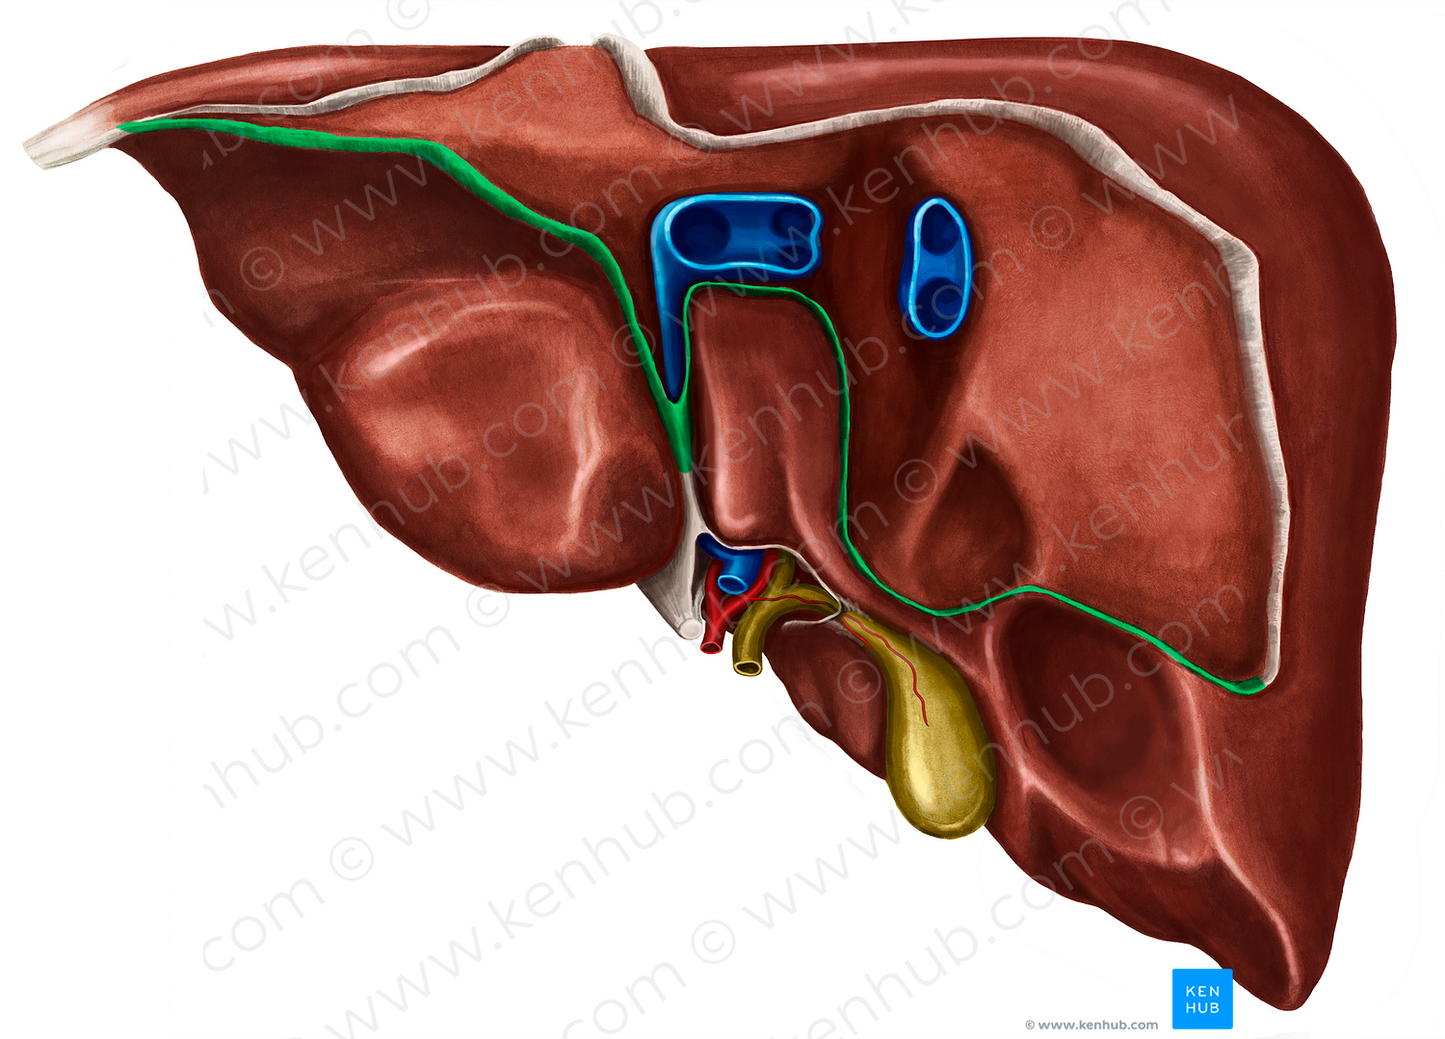 Posterior part of coronary ligament of liver (#20138)